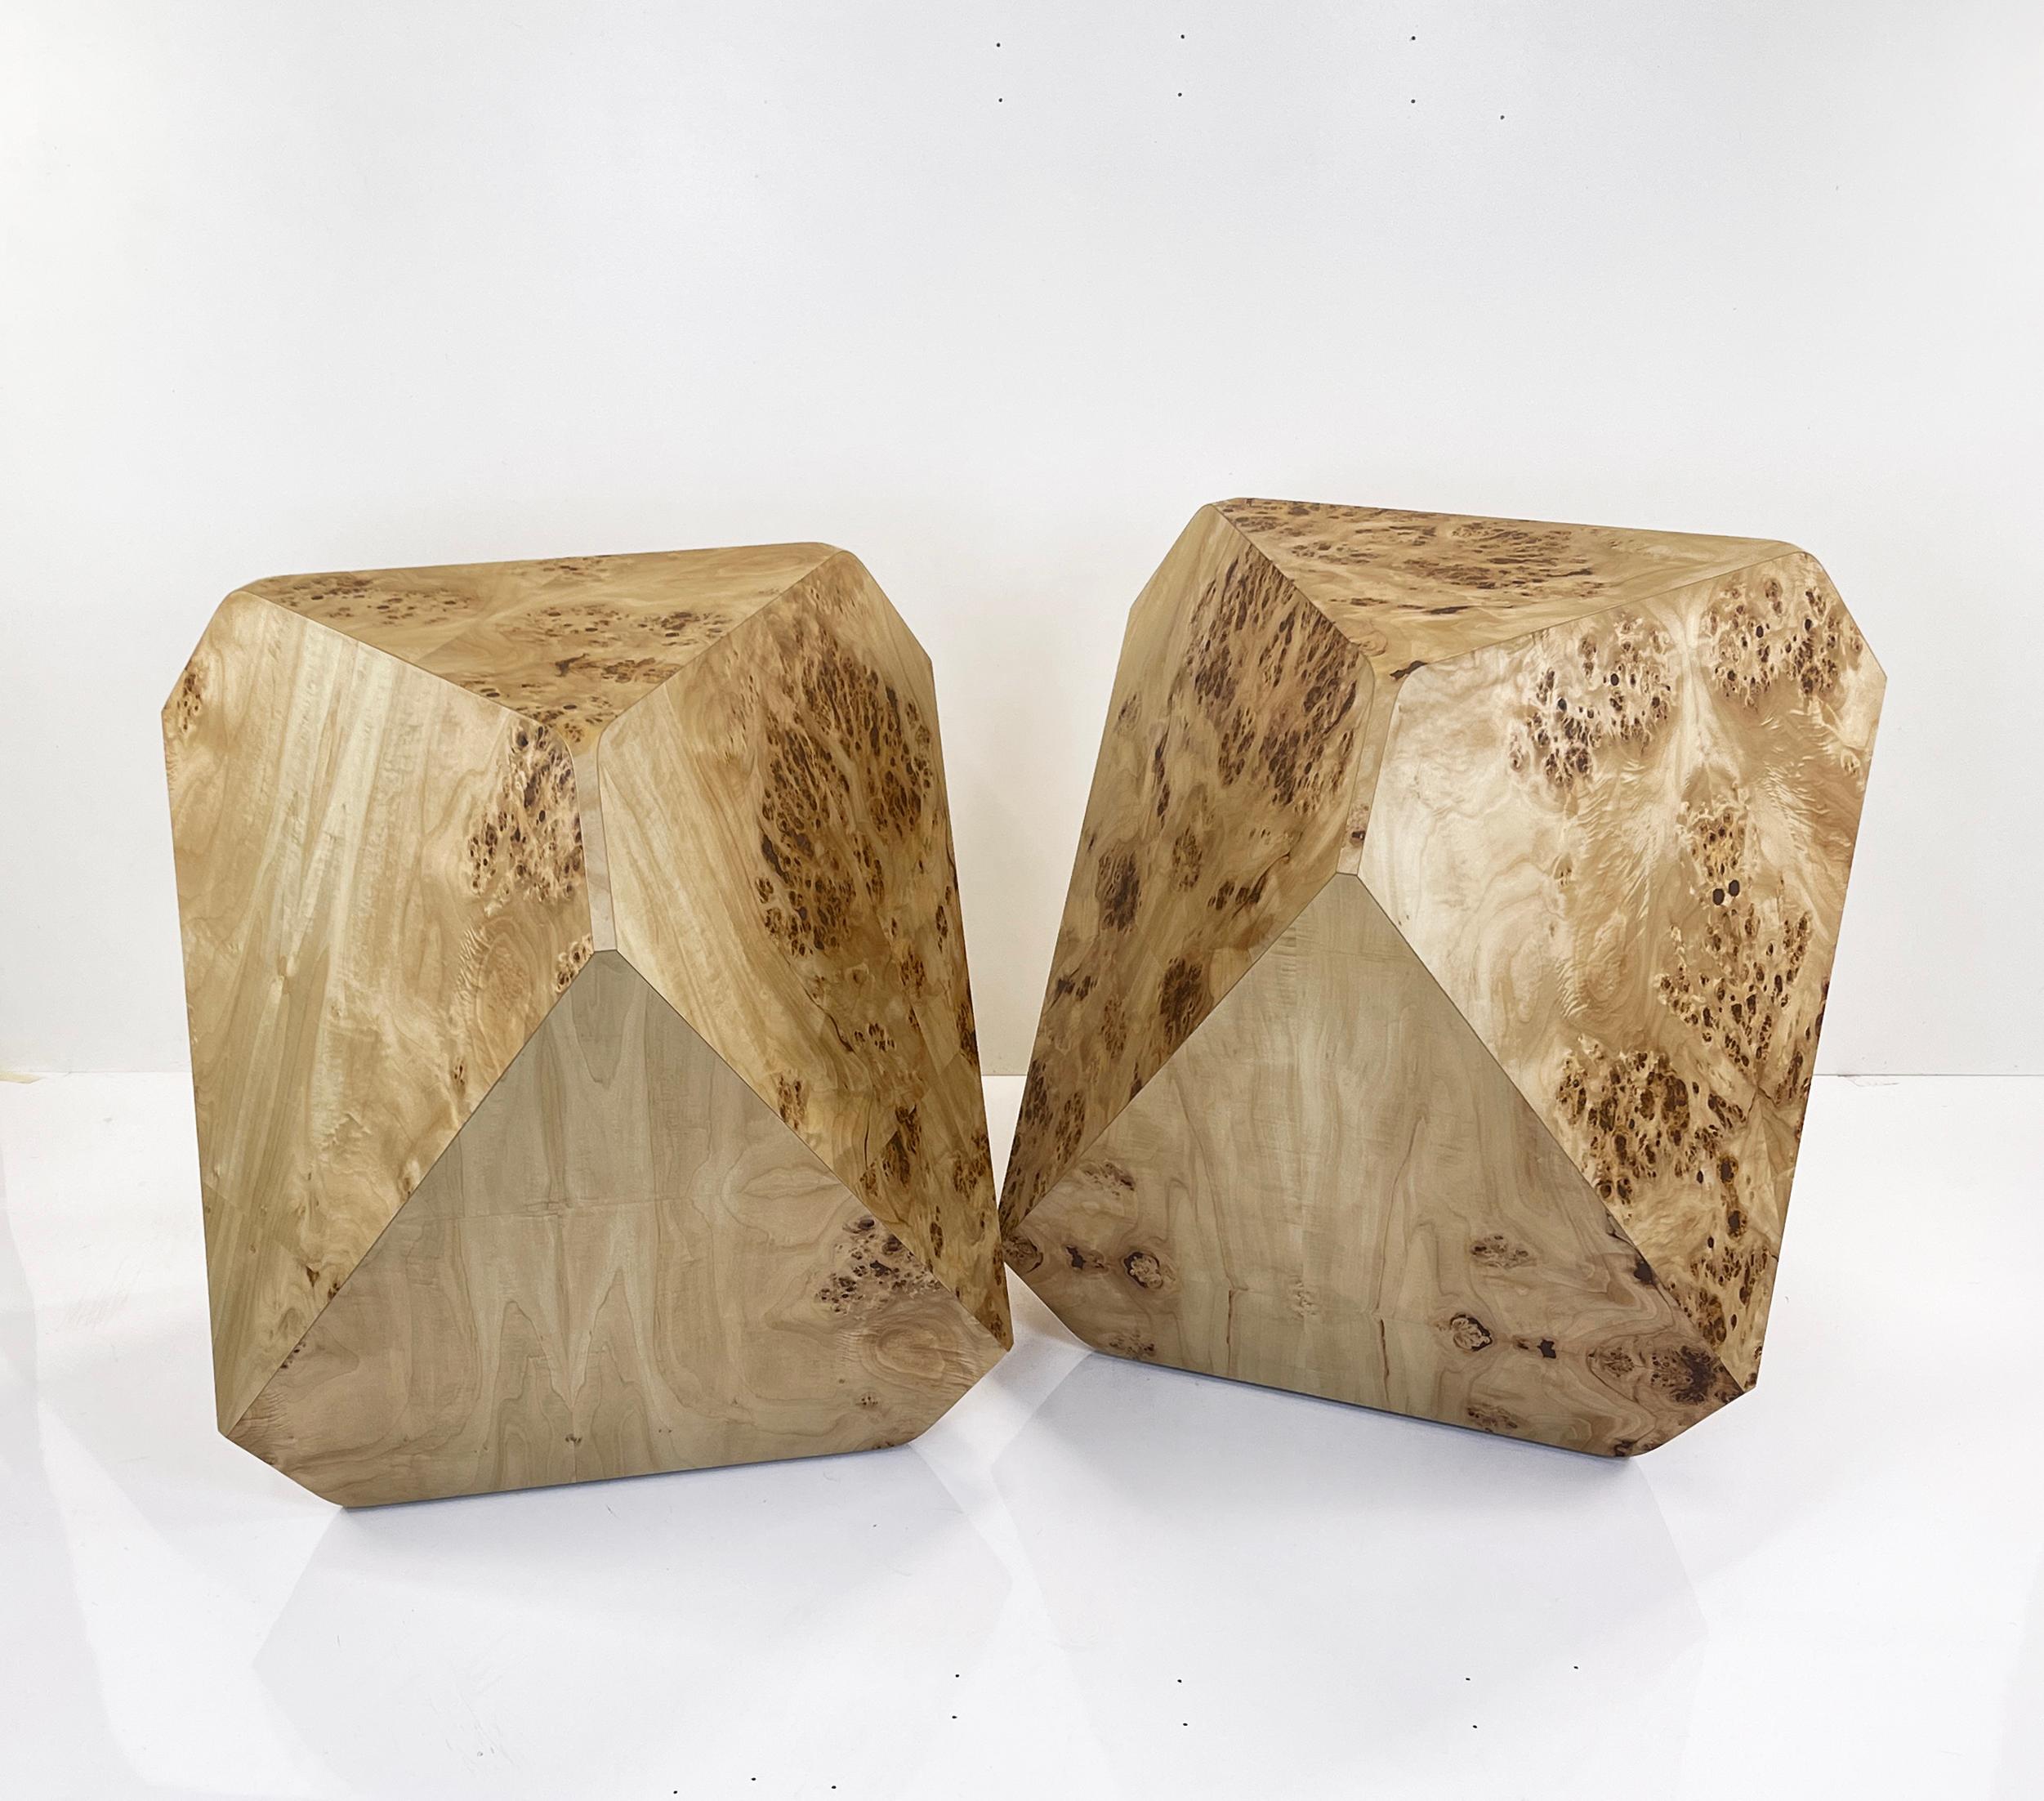 Hand-Crafted William Earle's iconic 'hal' dining pedestals in European Mappa burl For Sale